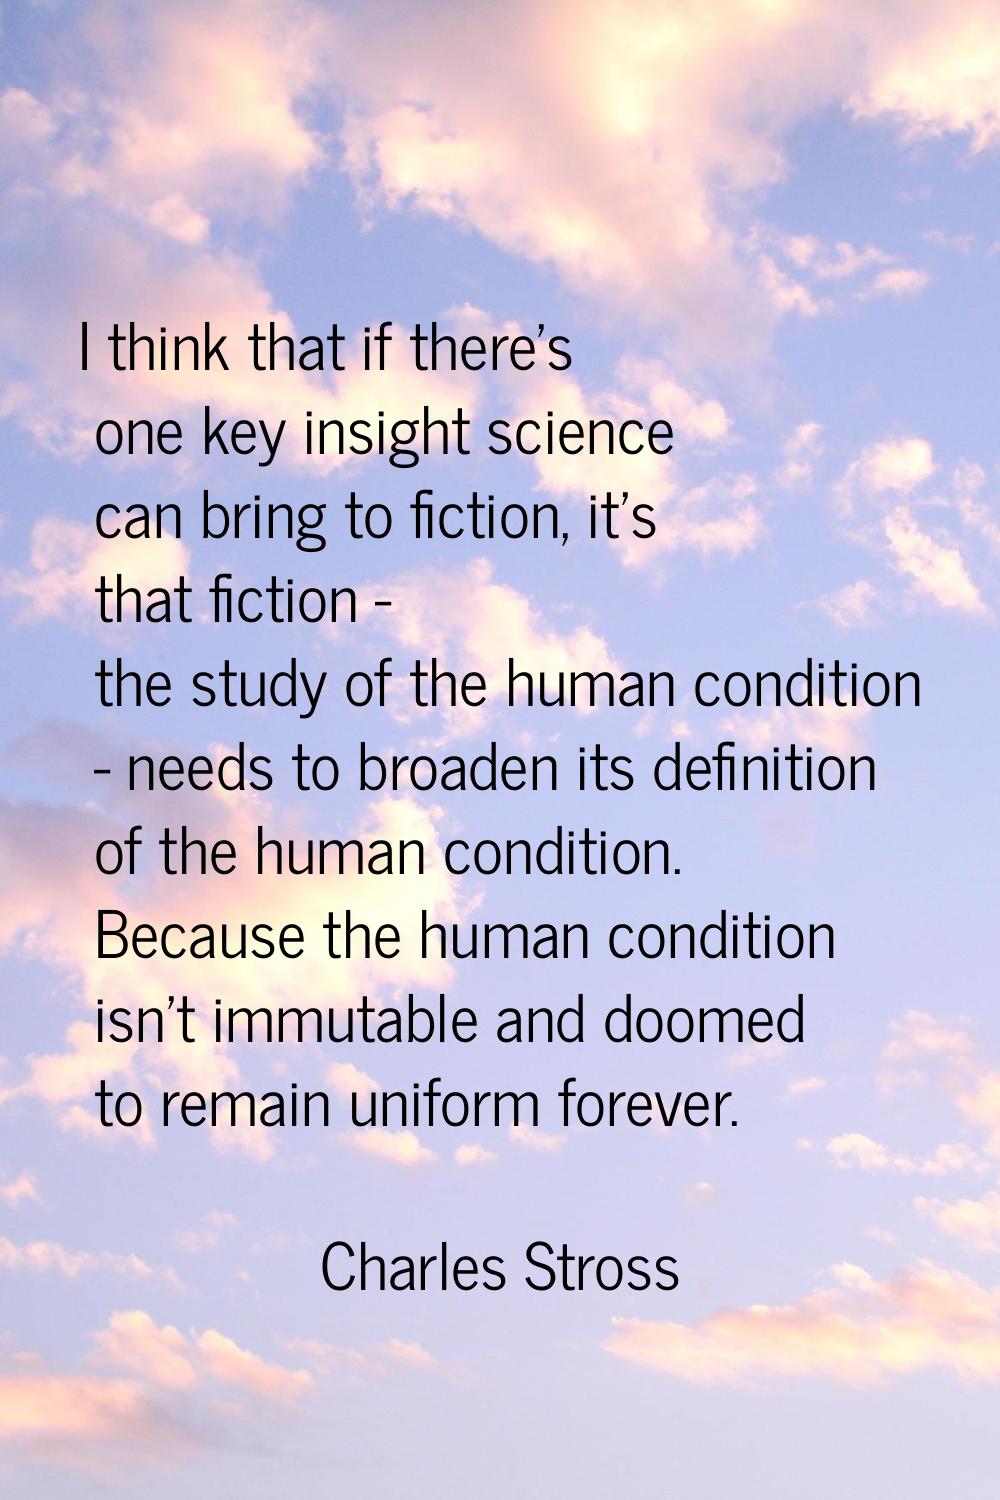 I think that if there's one key insight science can bring to fiction, it's that fiction - the study